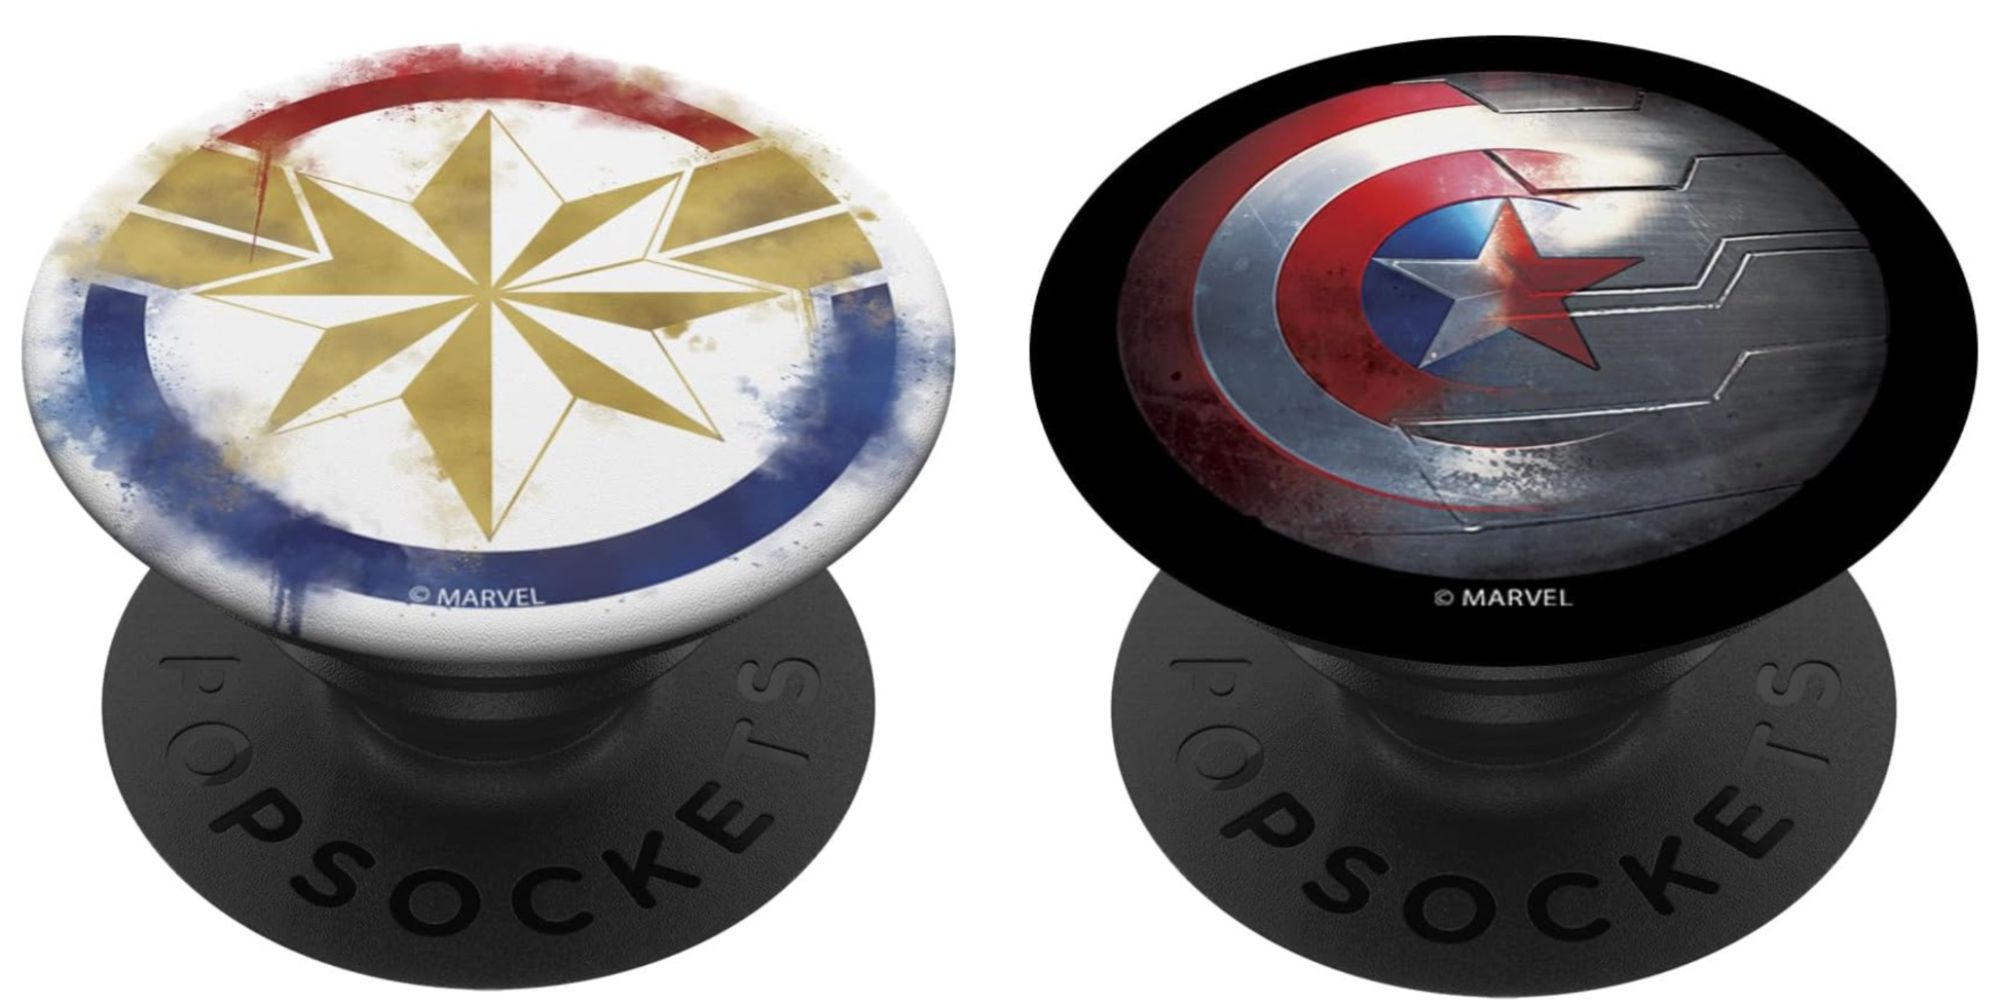 Marvel PopSockets Featured Split Image Captain Marvel and Captain America